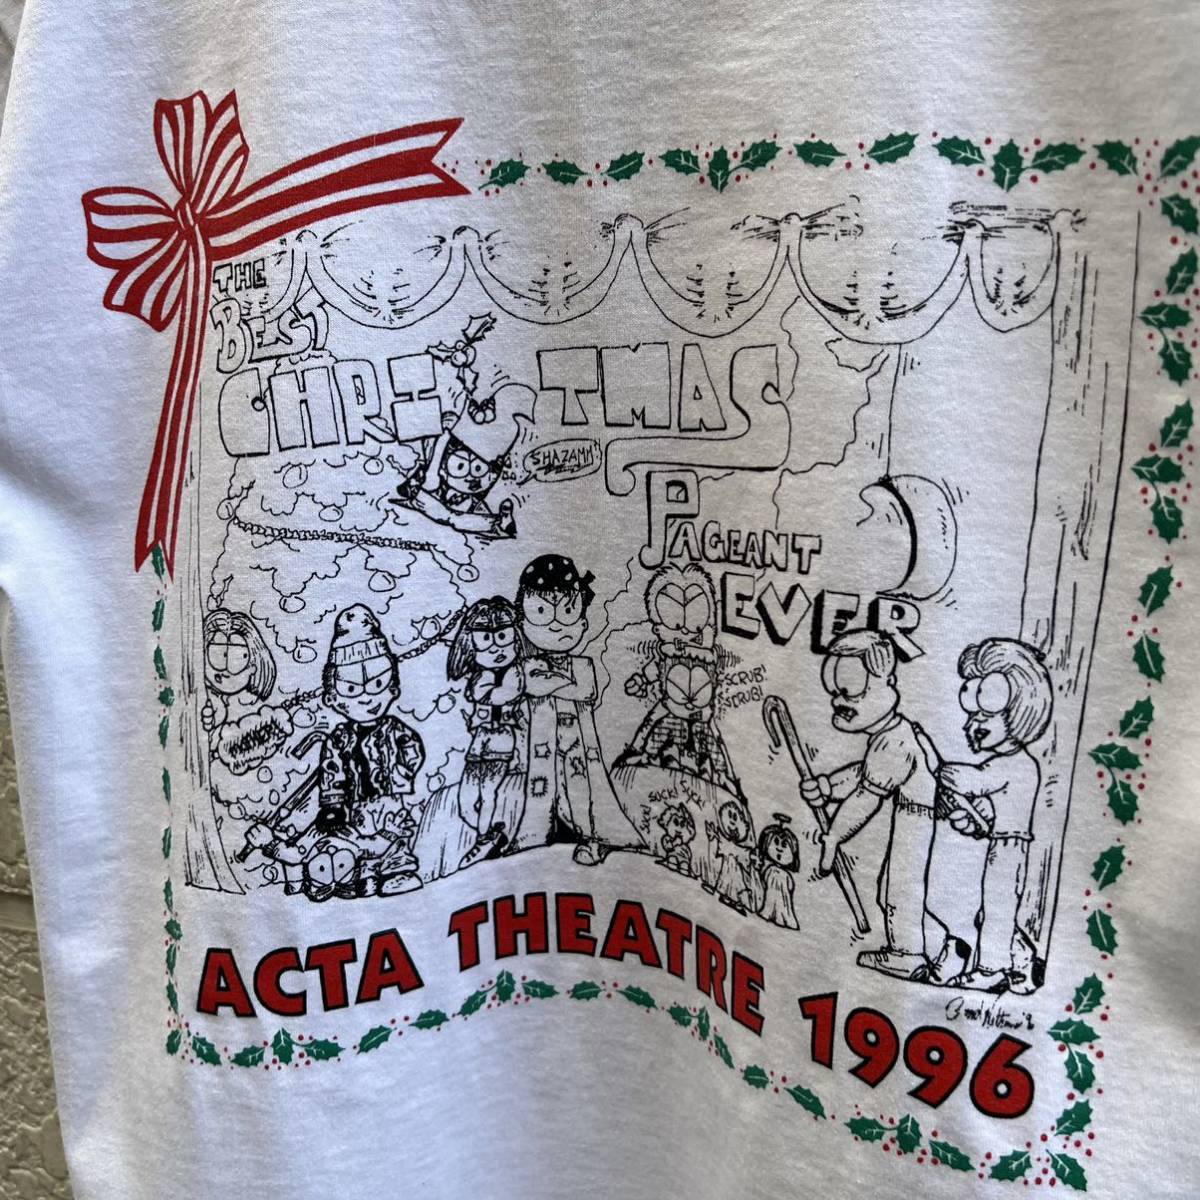 90s USA製 プリントTシャツ 白 ホワイト バックプリント JERZEES ジャージーズ アメリカ製 古着 vintage ヴィンテージ  ボーイズ L